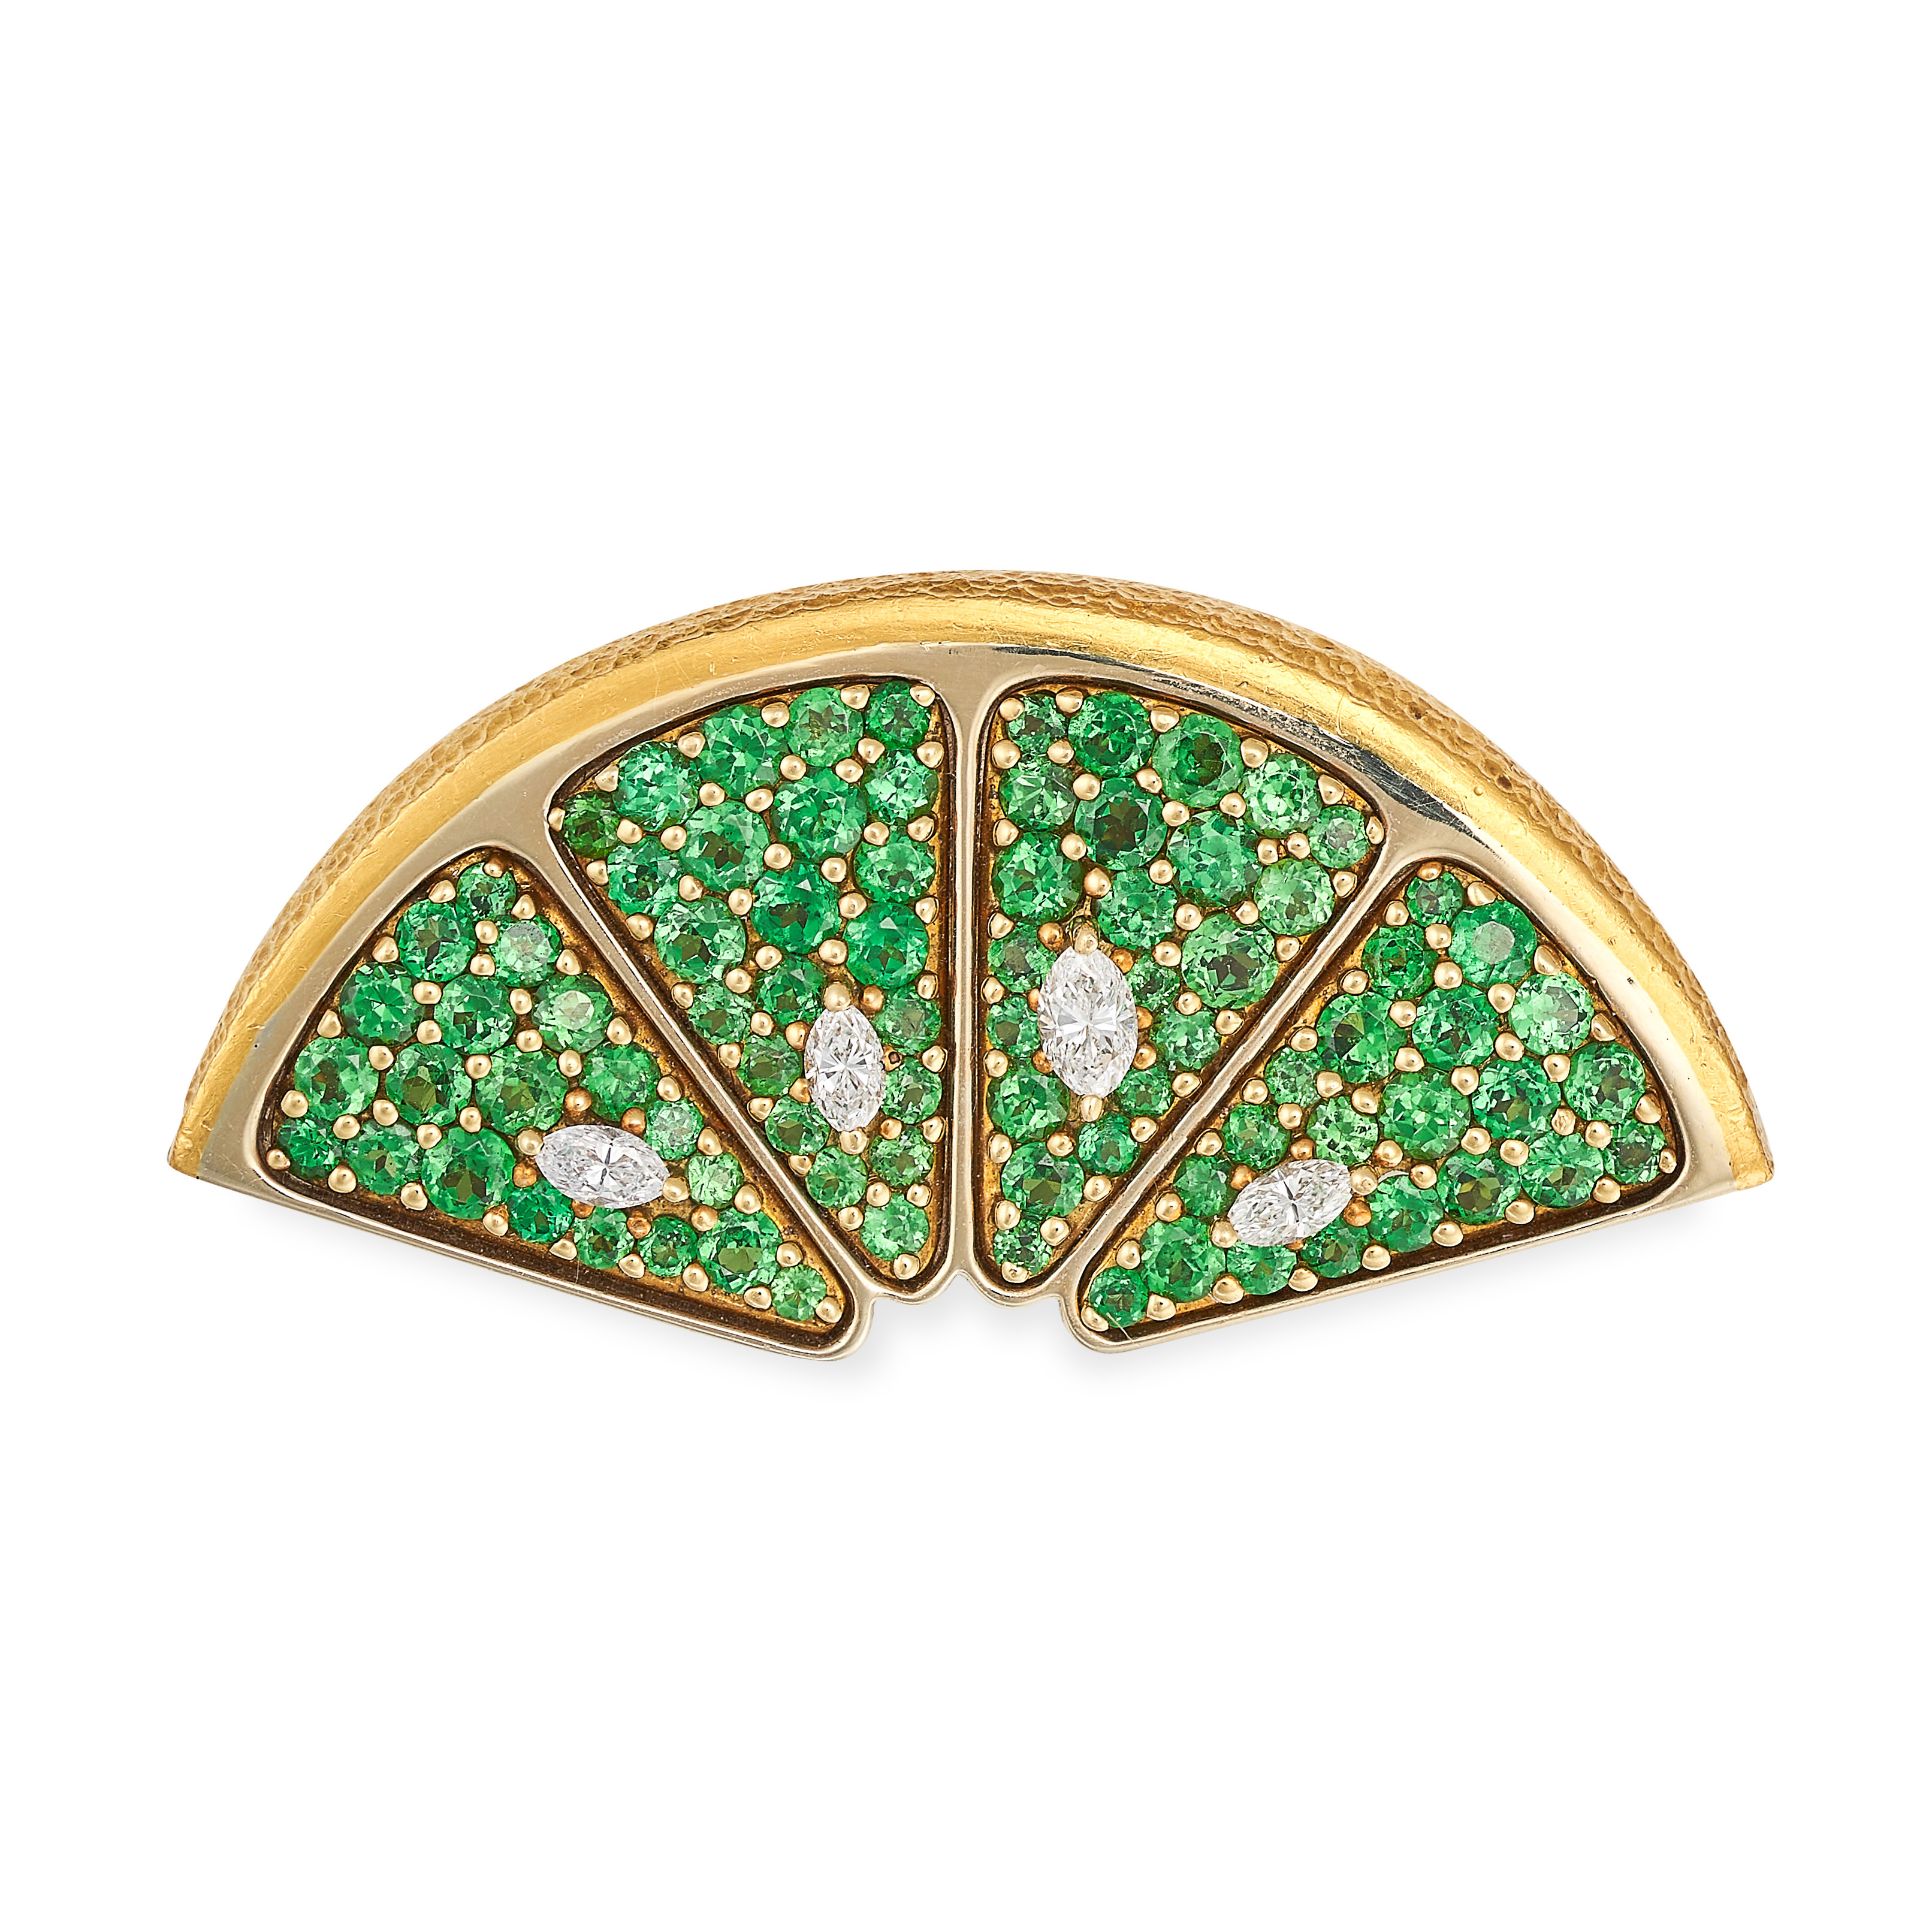 A VINTAGE TSAVORITE GARNET AND DIAMOND LIME BROOCH in 18ct yellow gold, designed as a wedge of lime,